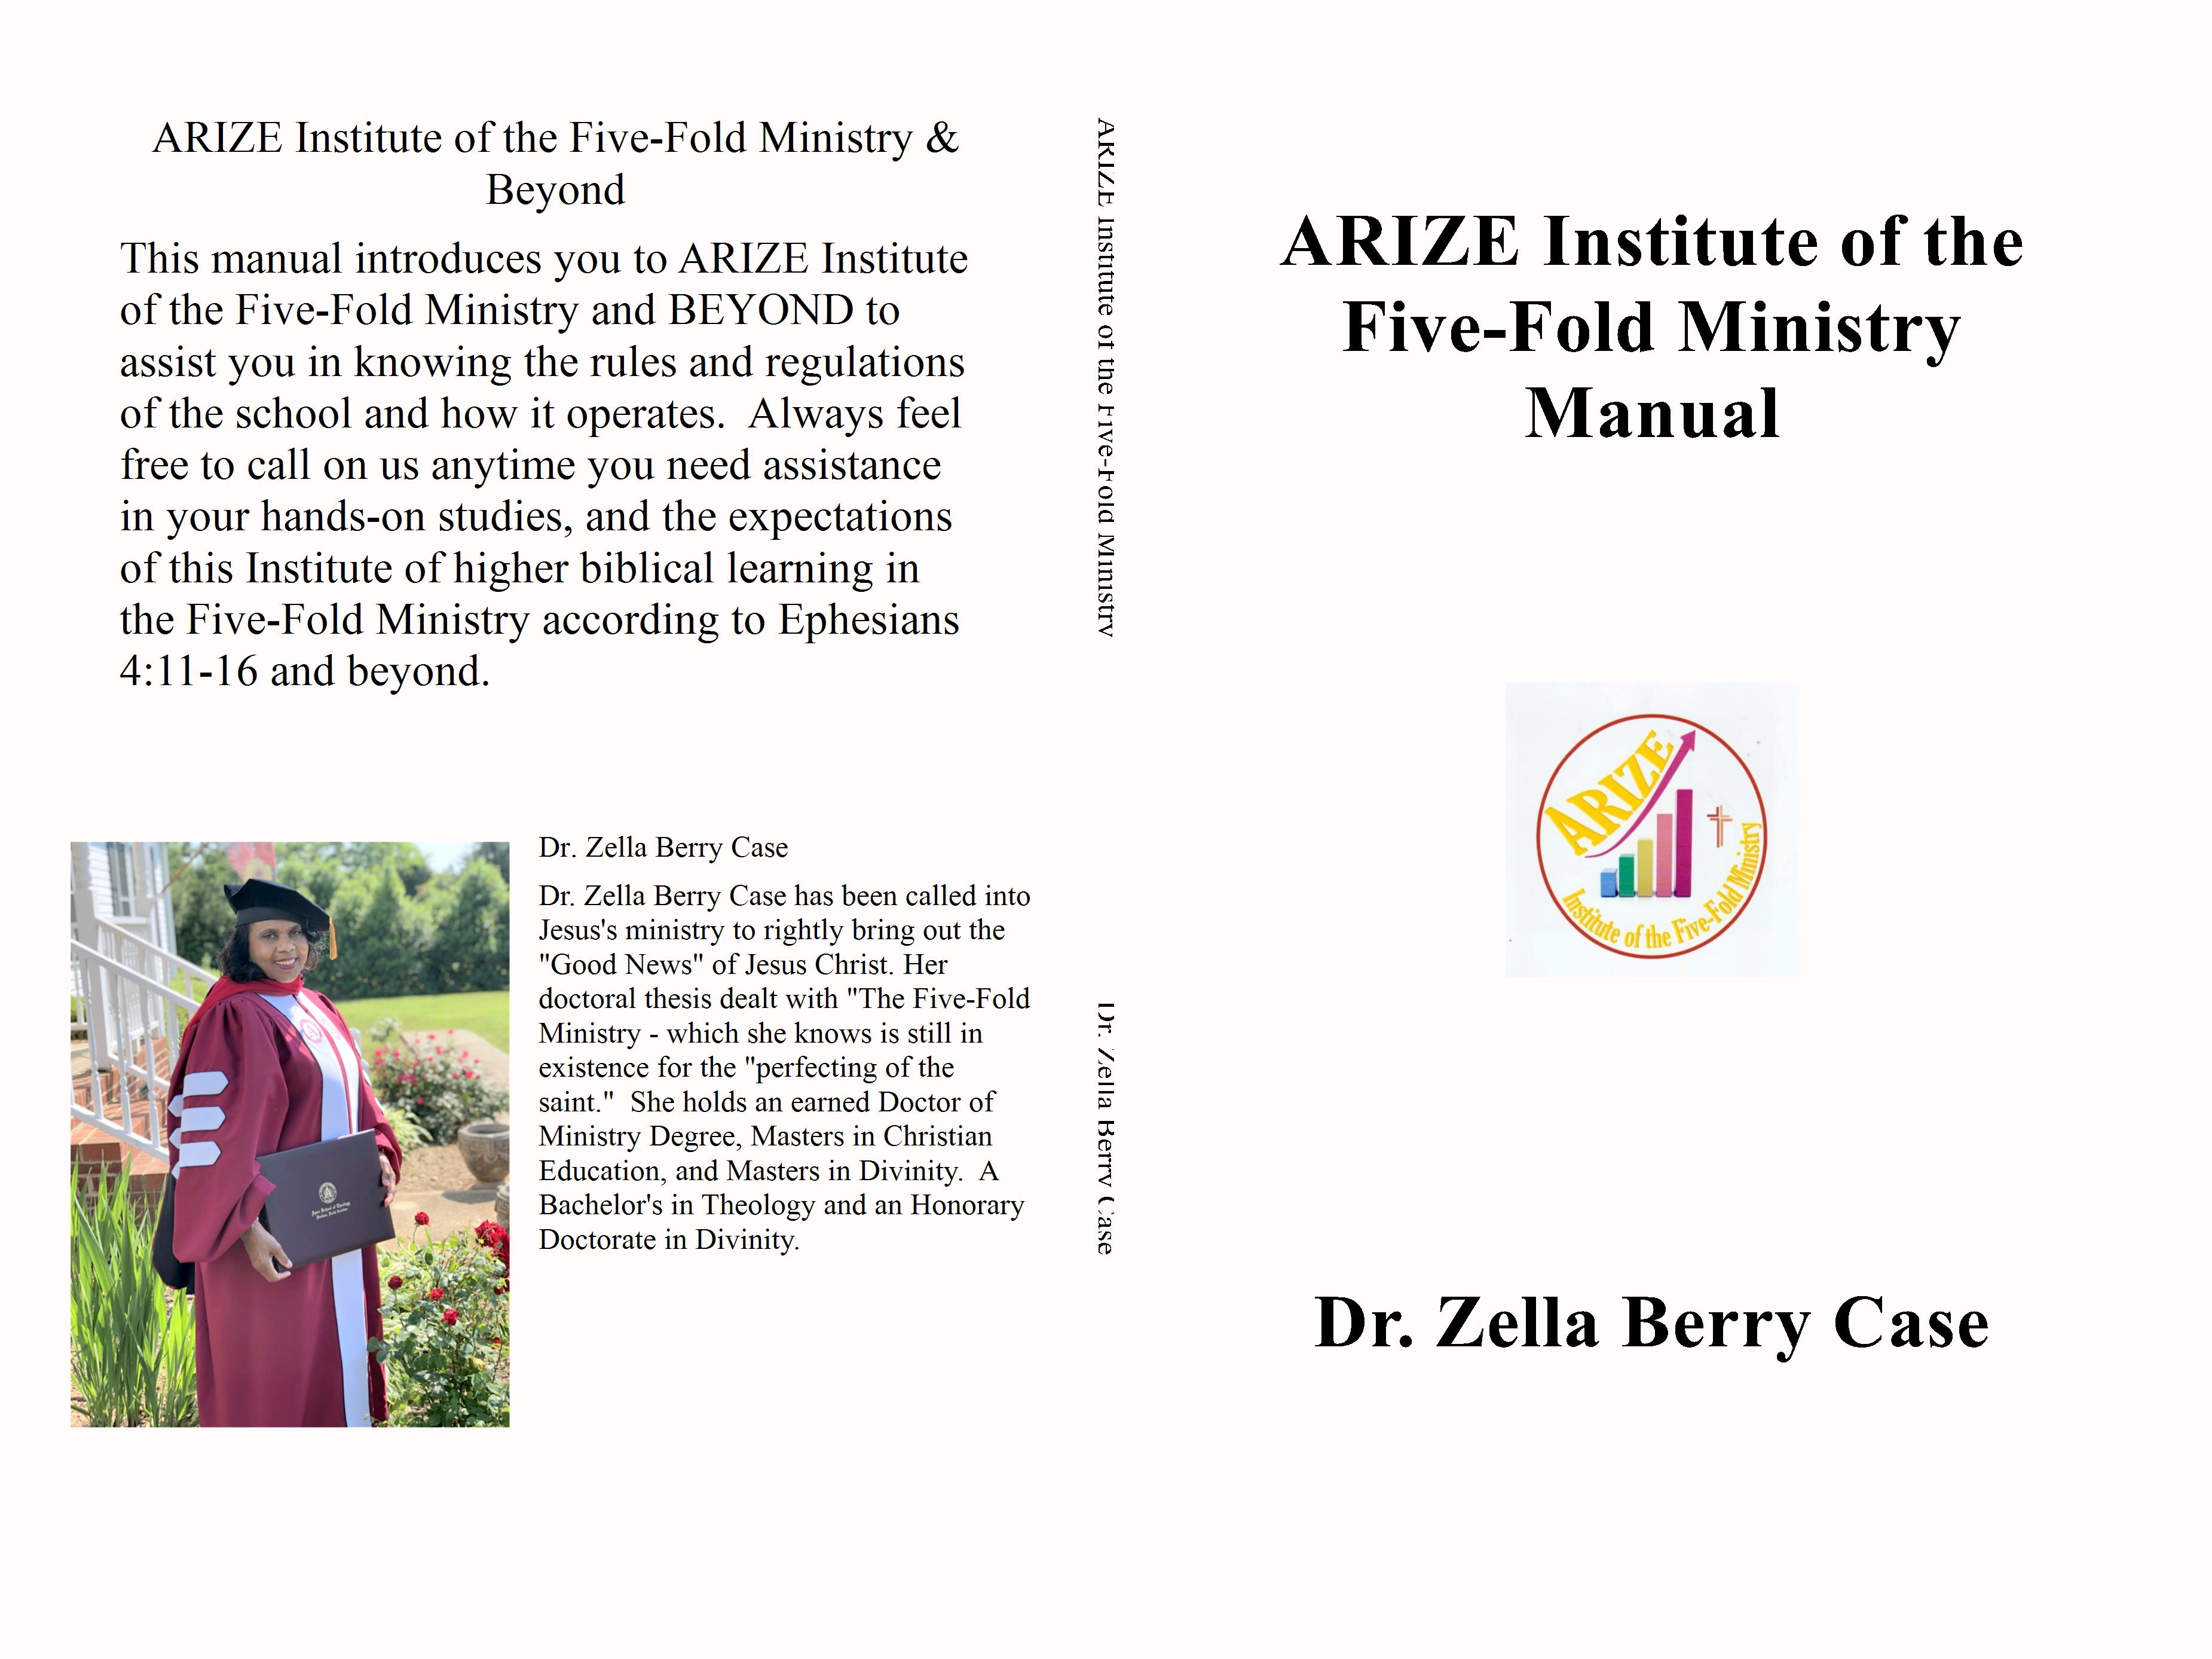 ARIZE Institute of the Five-Fold Ministry cover image